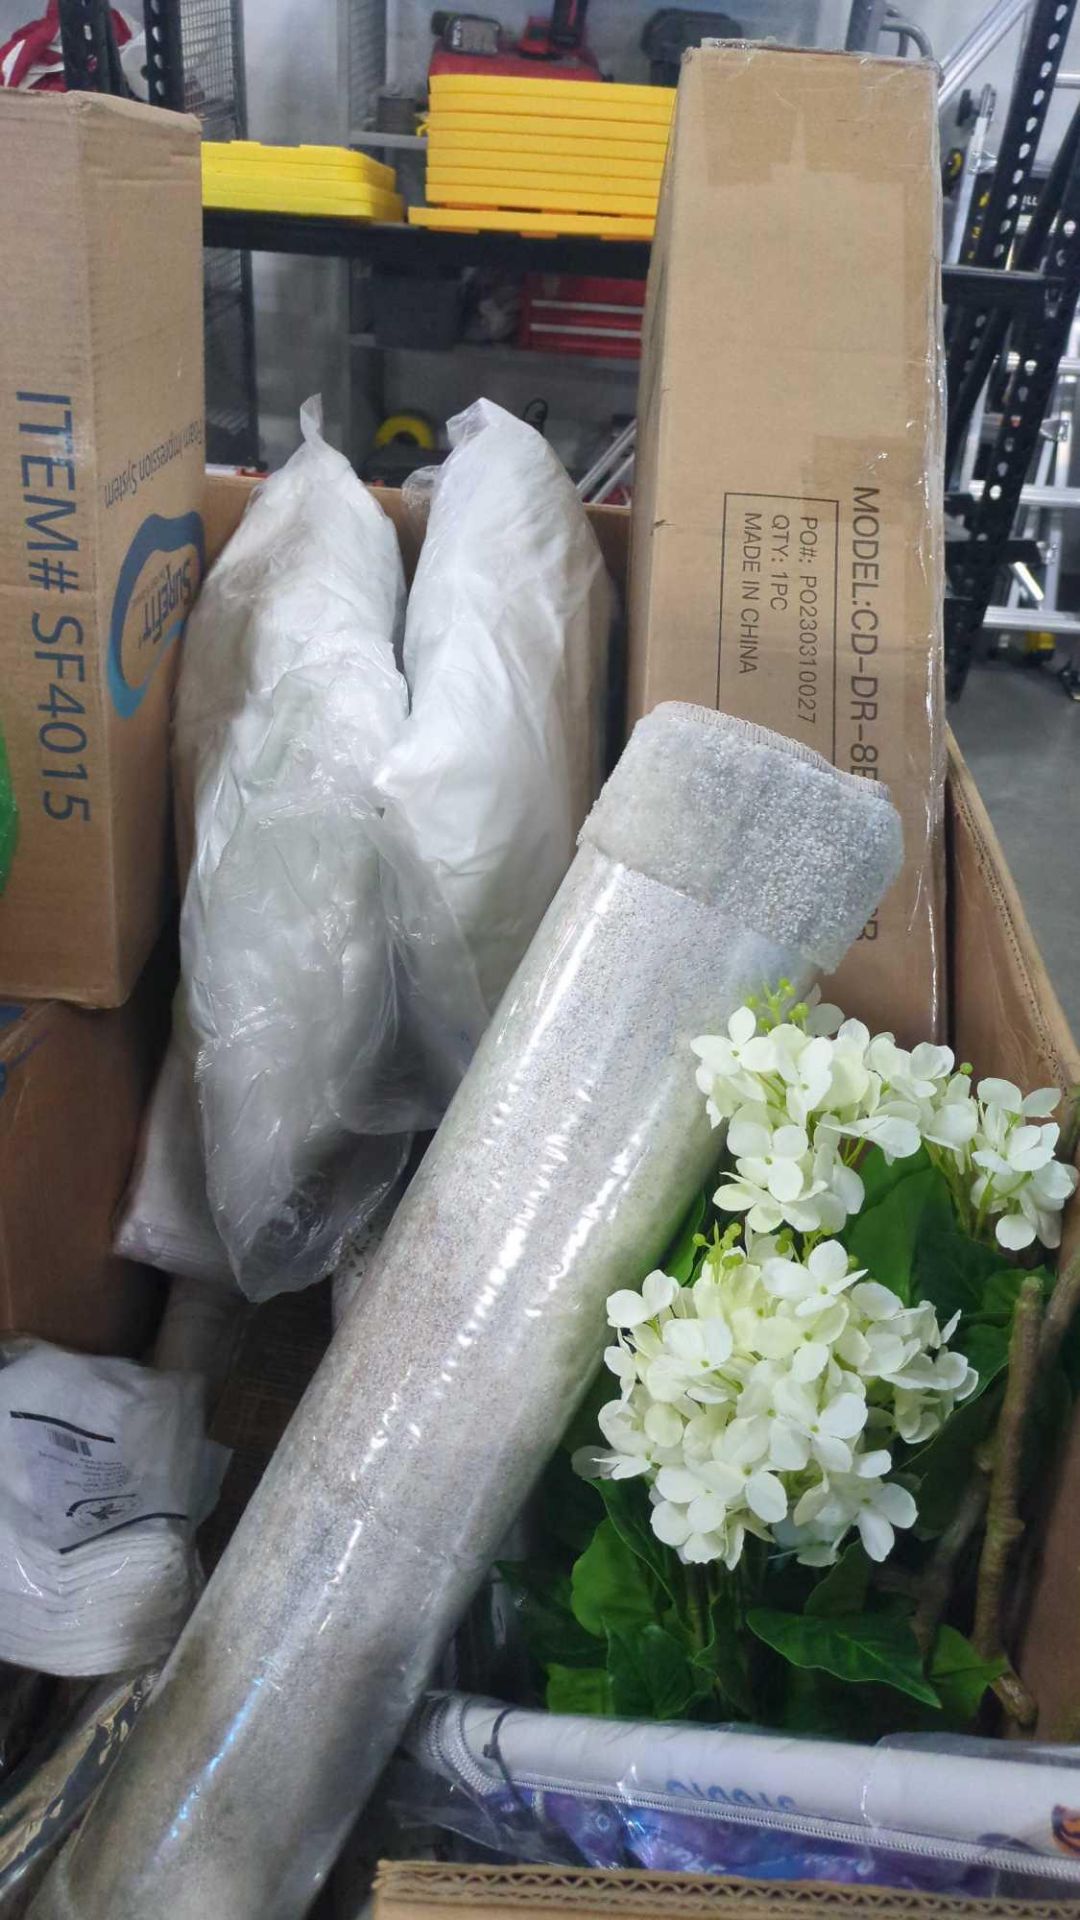 Filter roll, Faux flowers, Hinged, containers, rug, Bubble wrap, peleton mat, towels and more - Image 2 of 9